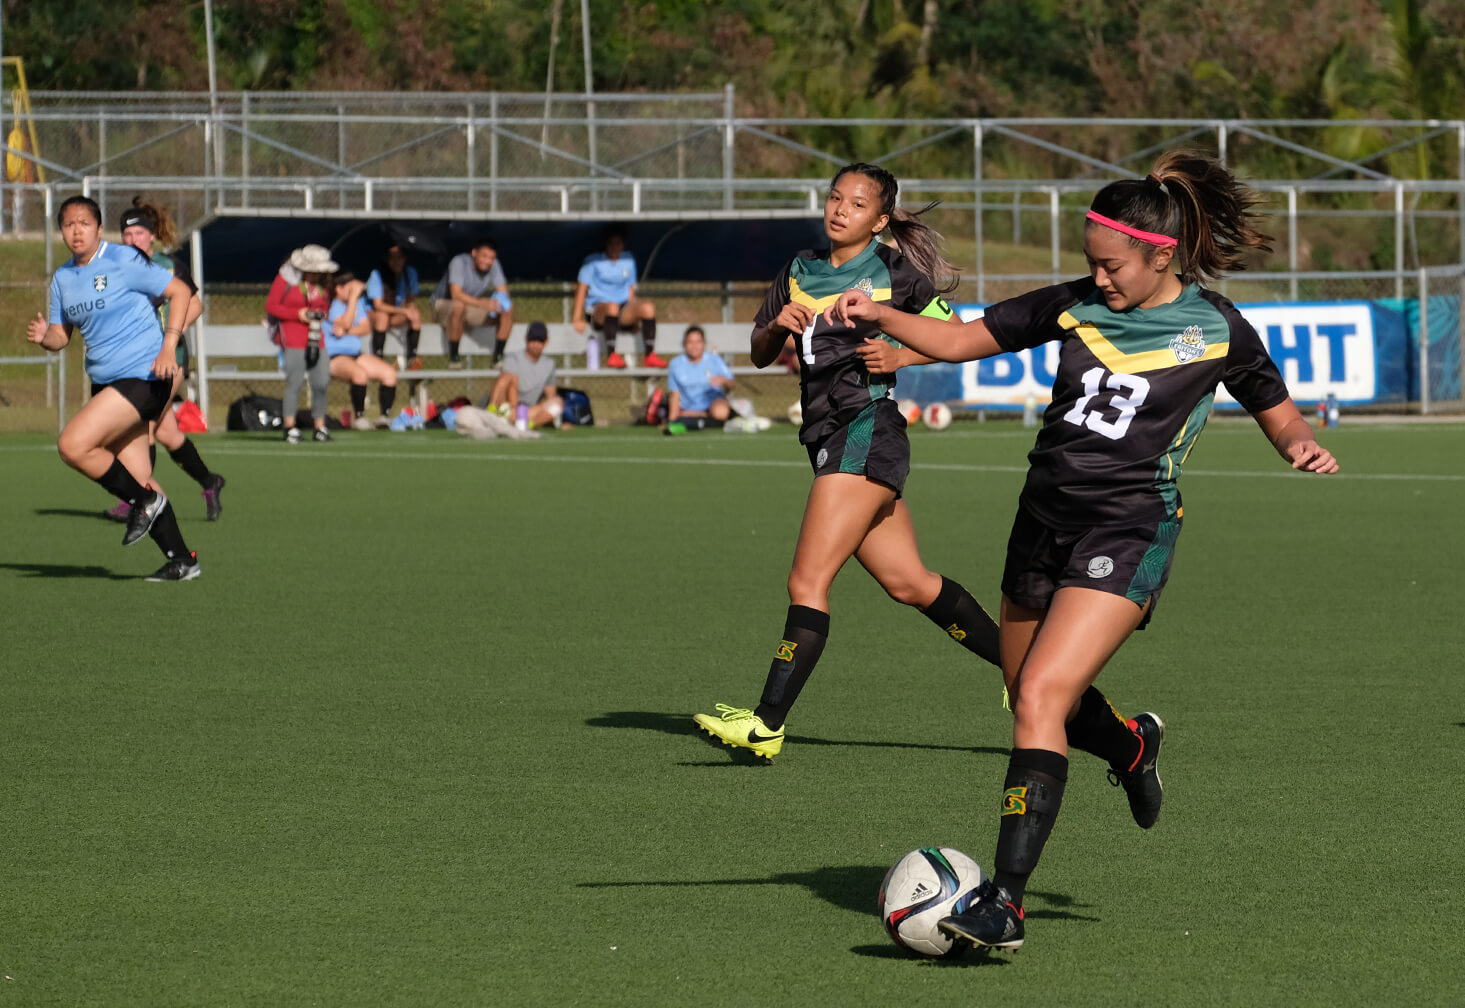 UOG Women's Soccer Team in one of their previous games versus the Sidekicks